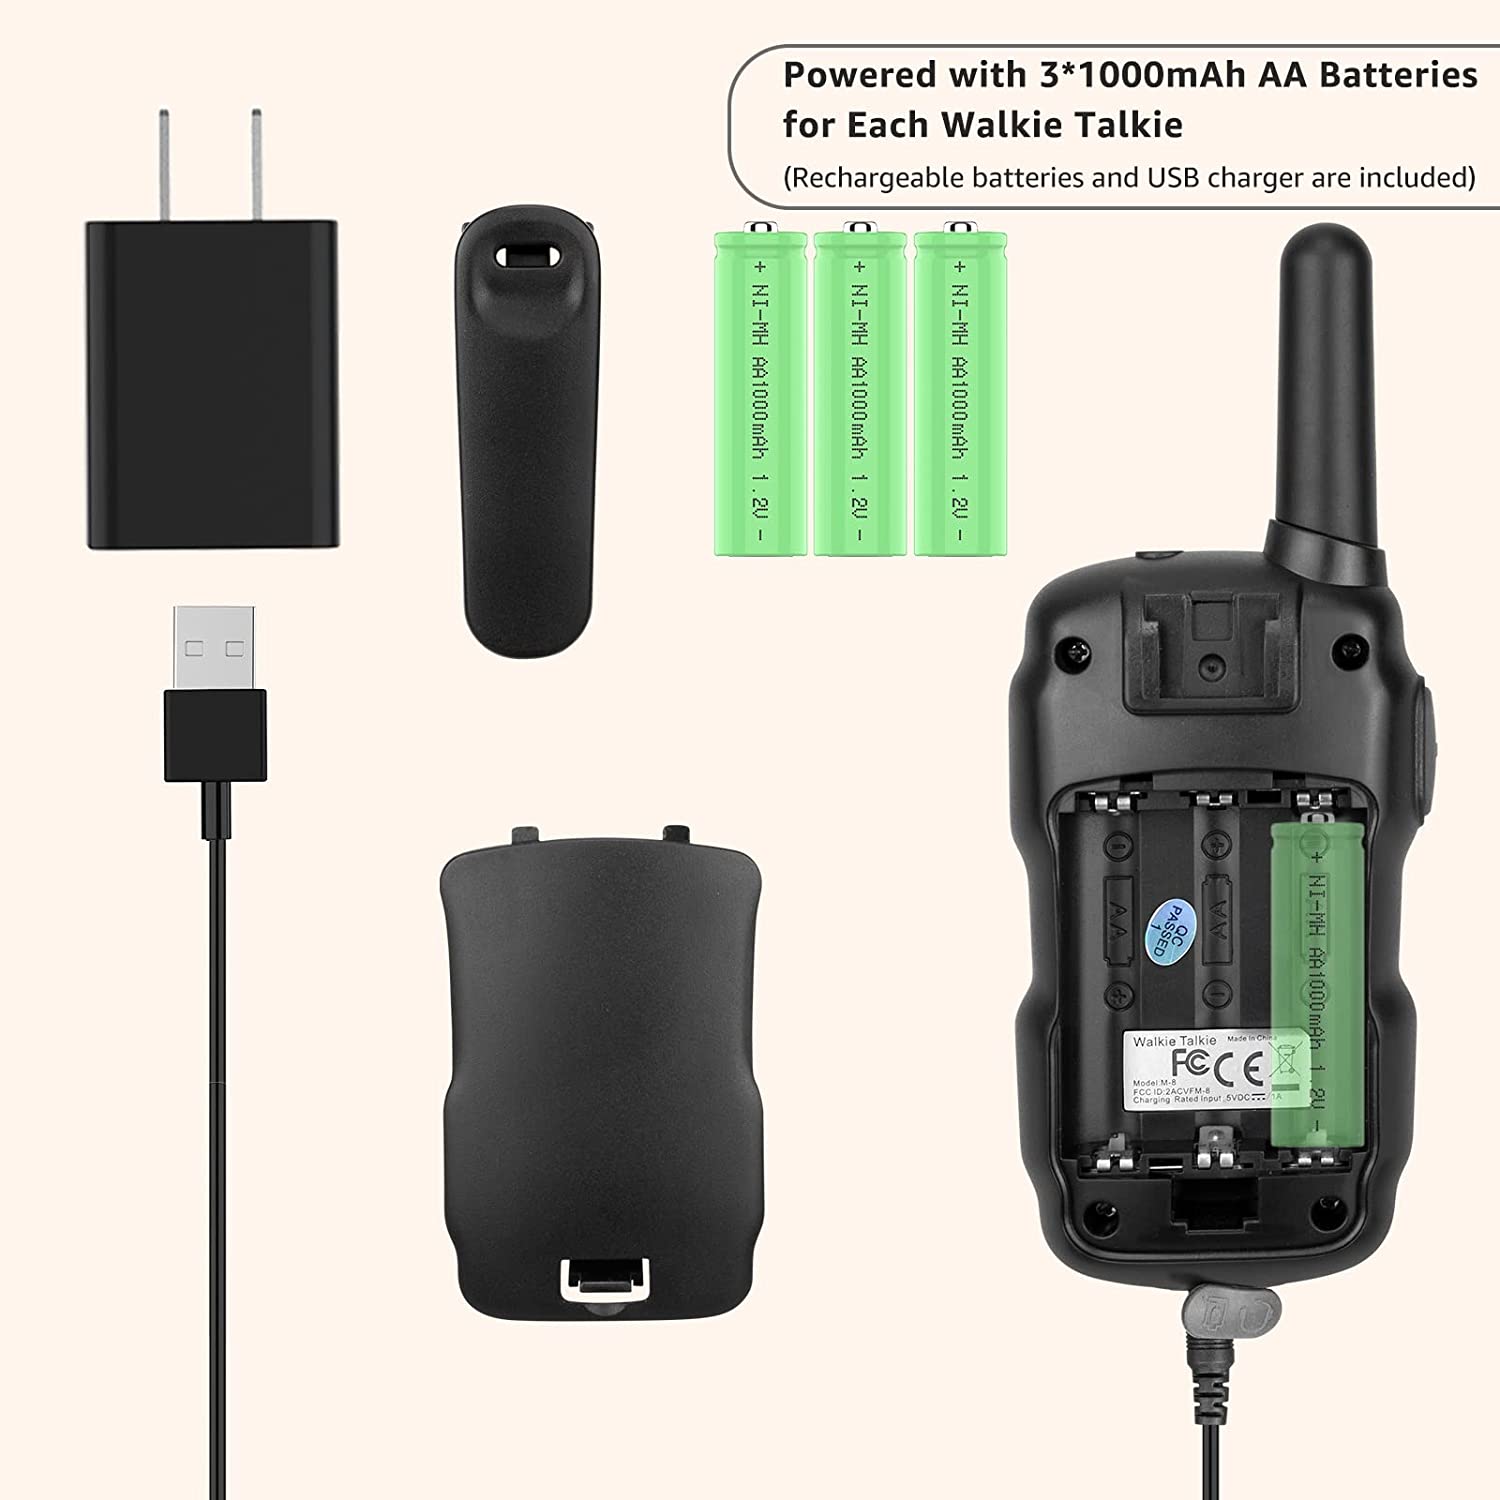 Wishouse Walkie Talkies for Adults Rechargeable Sets with Usb Chargers  4X3000mAh Batteries Lanyards,Family Walky Talky Handheld Way Radio Long  Range for Hiking Camping,Xmas Birthday Gi